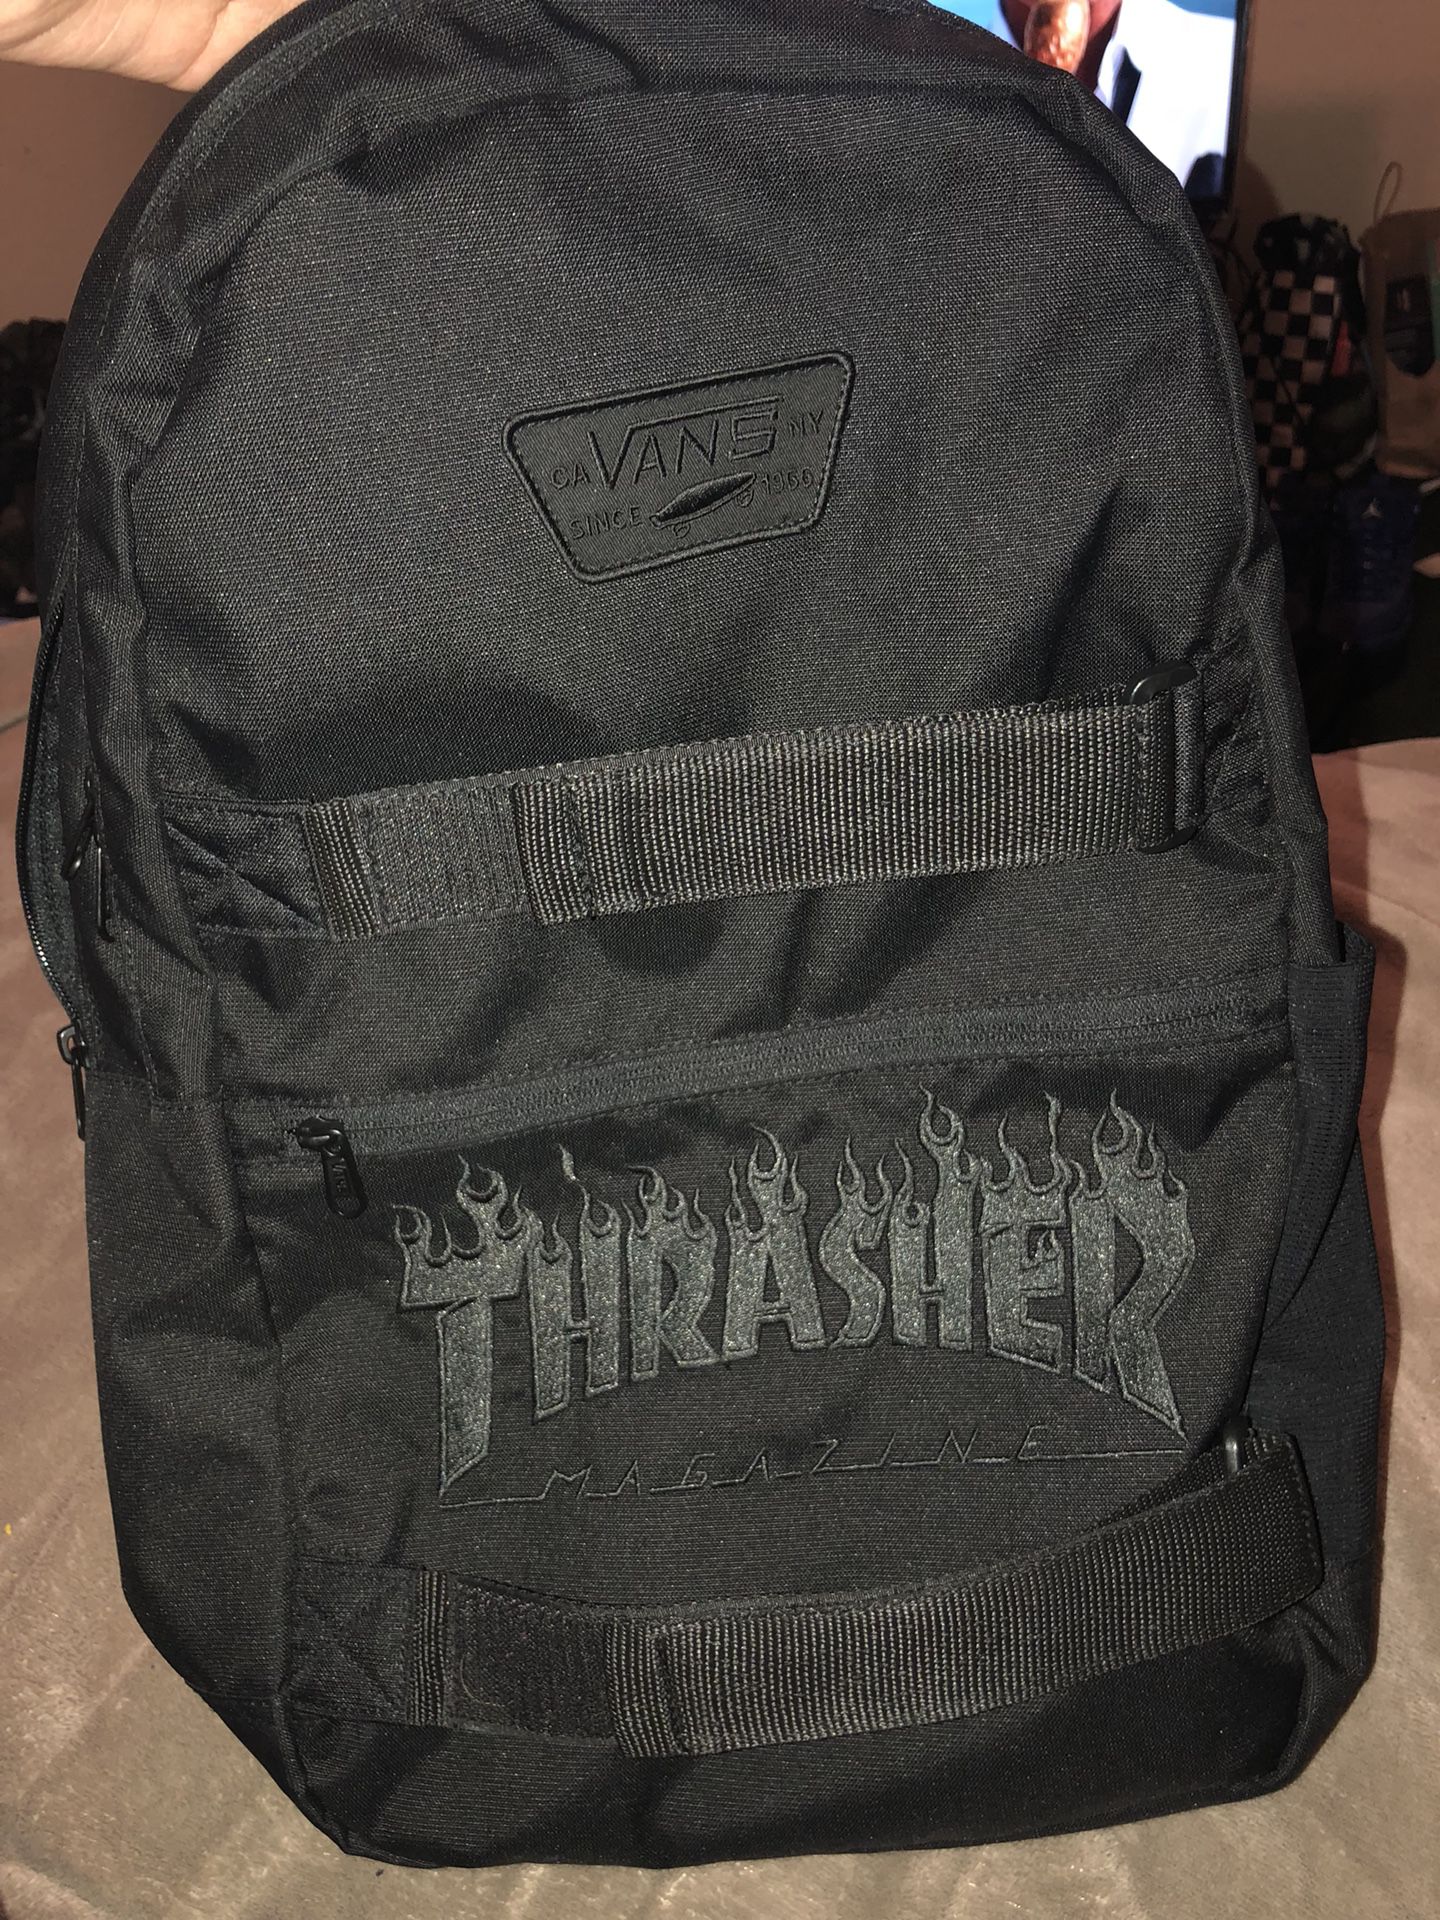 regional Persona Konkurrere Vans x Thrasher Backpack ( Sold out everywhere ) for Sale in Bellflower, CA  - OfferUp